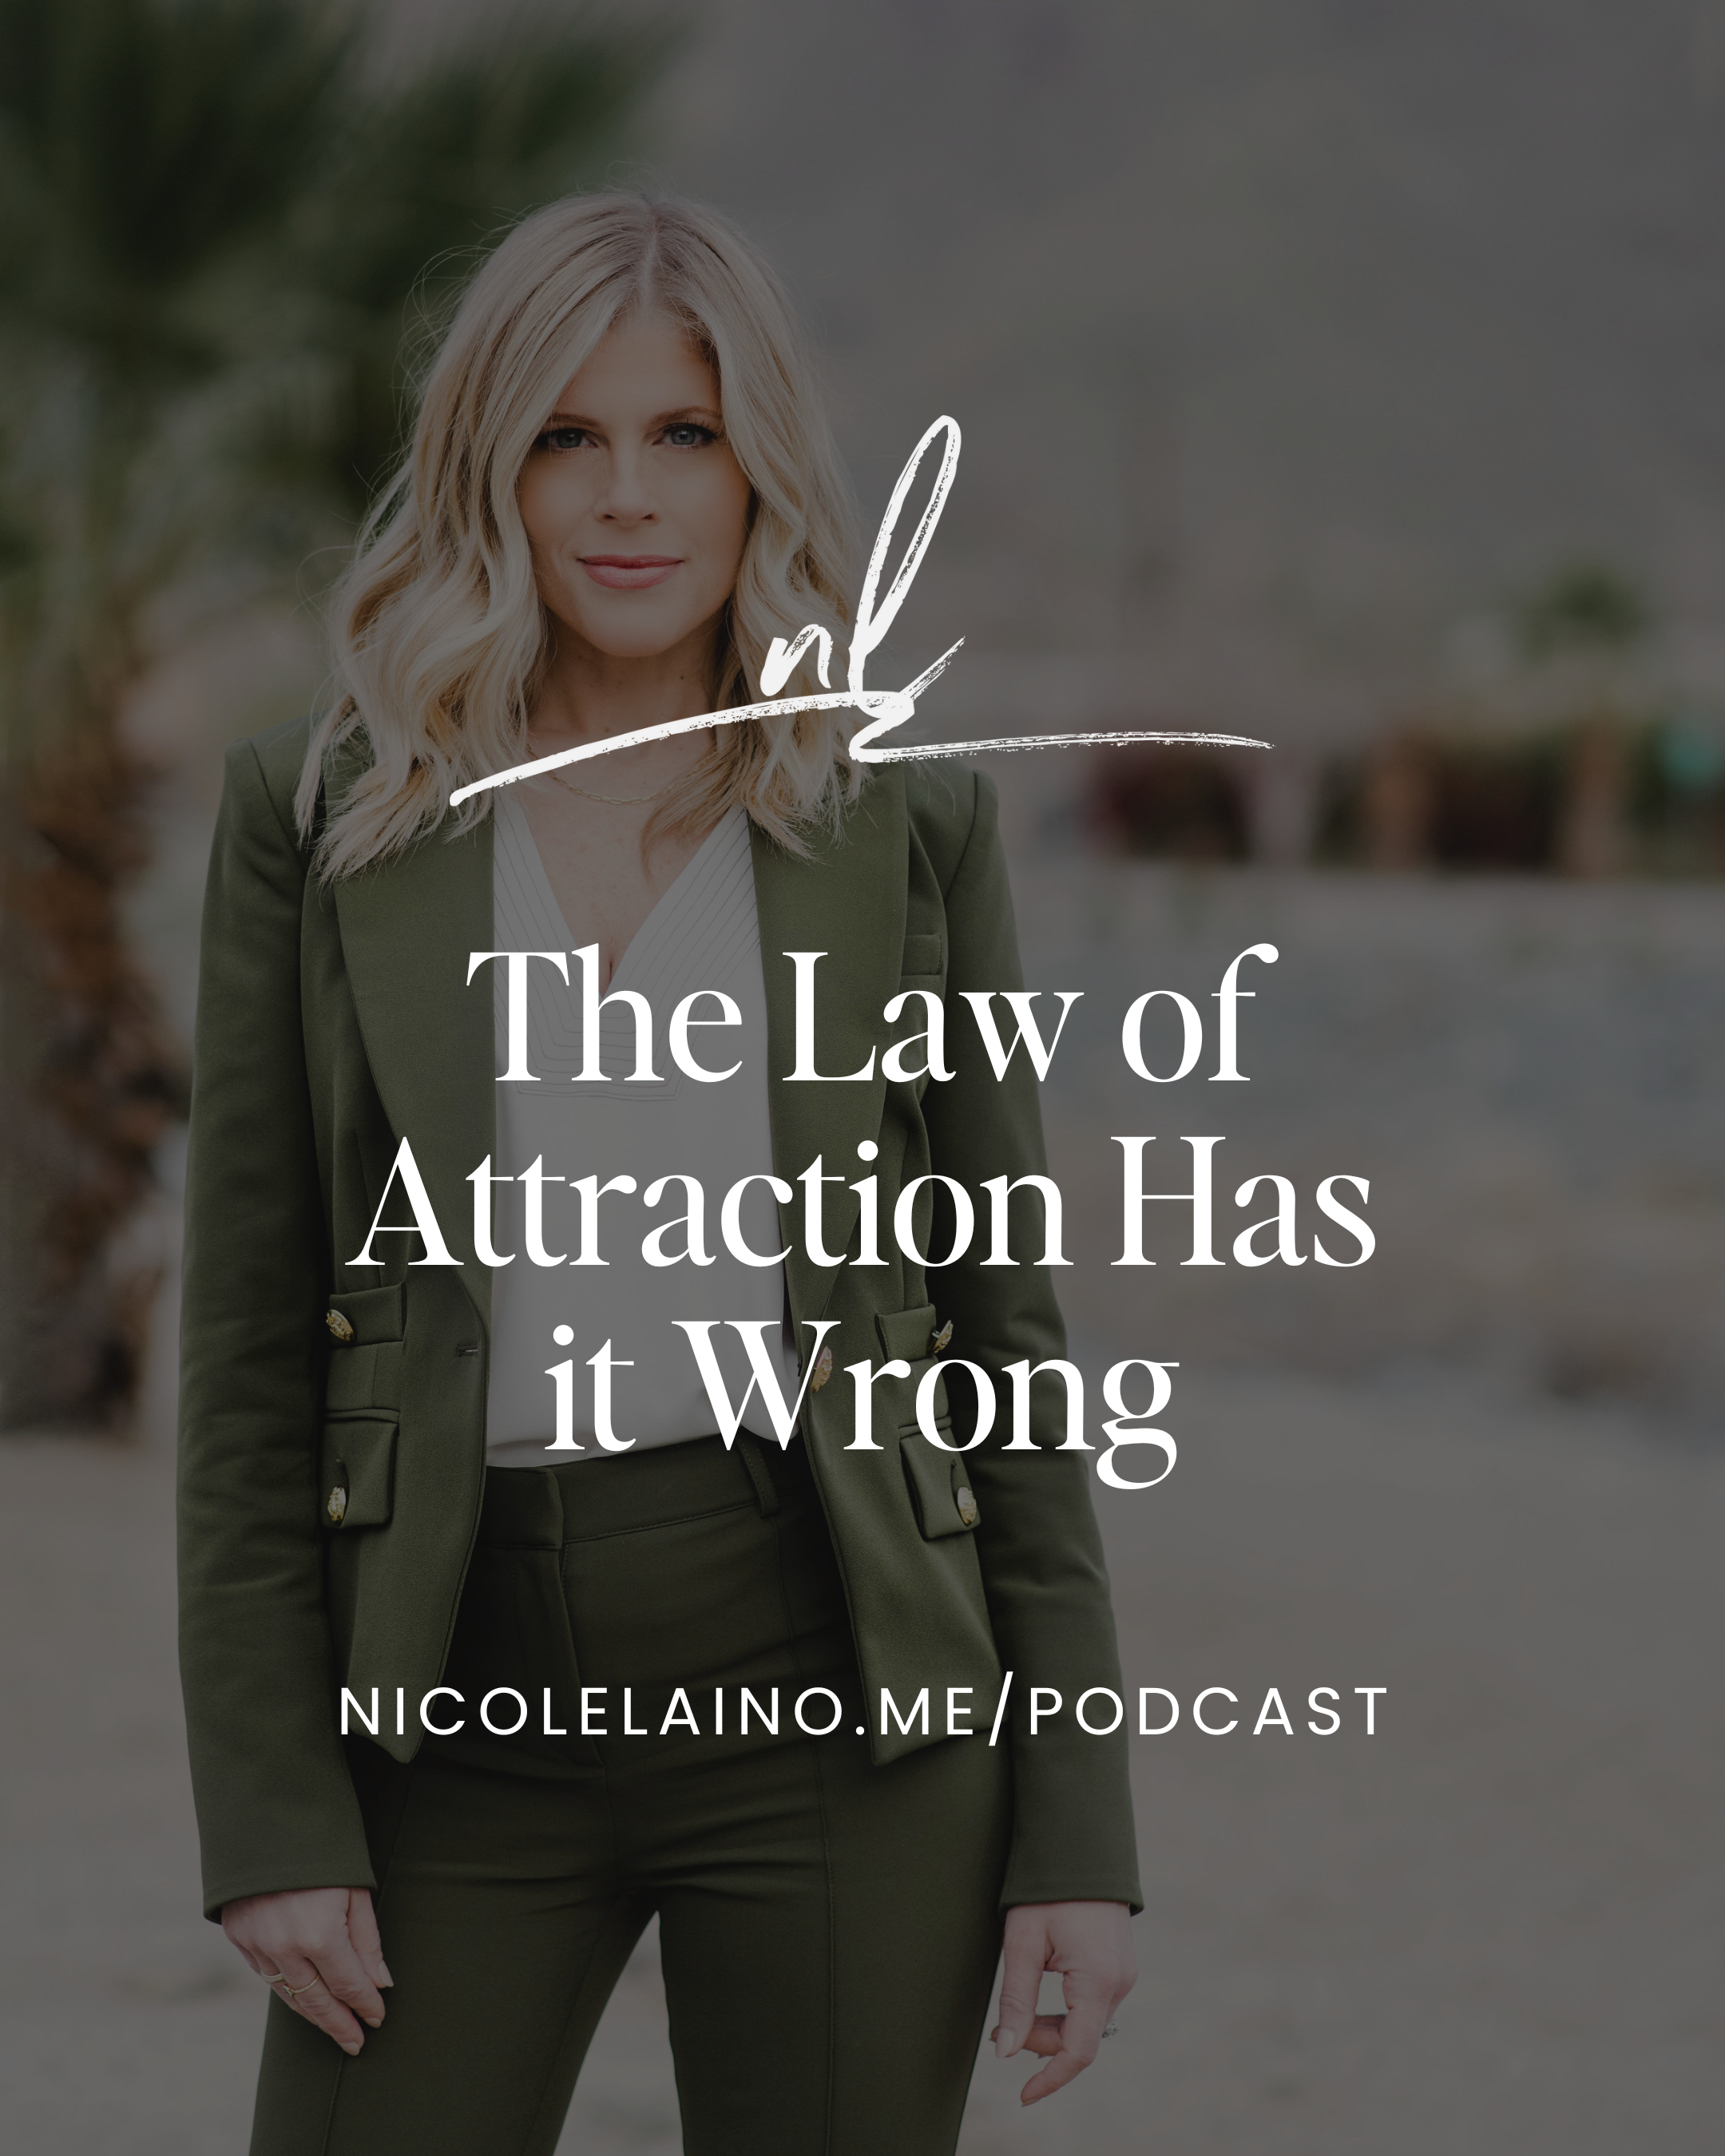 The Law of Attraction Has it Wrong